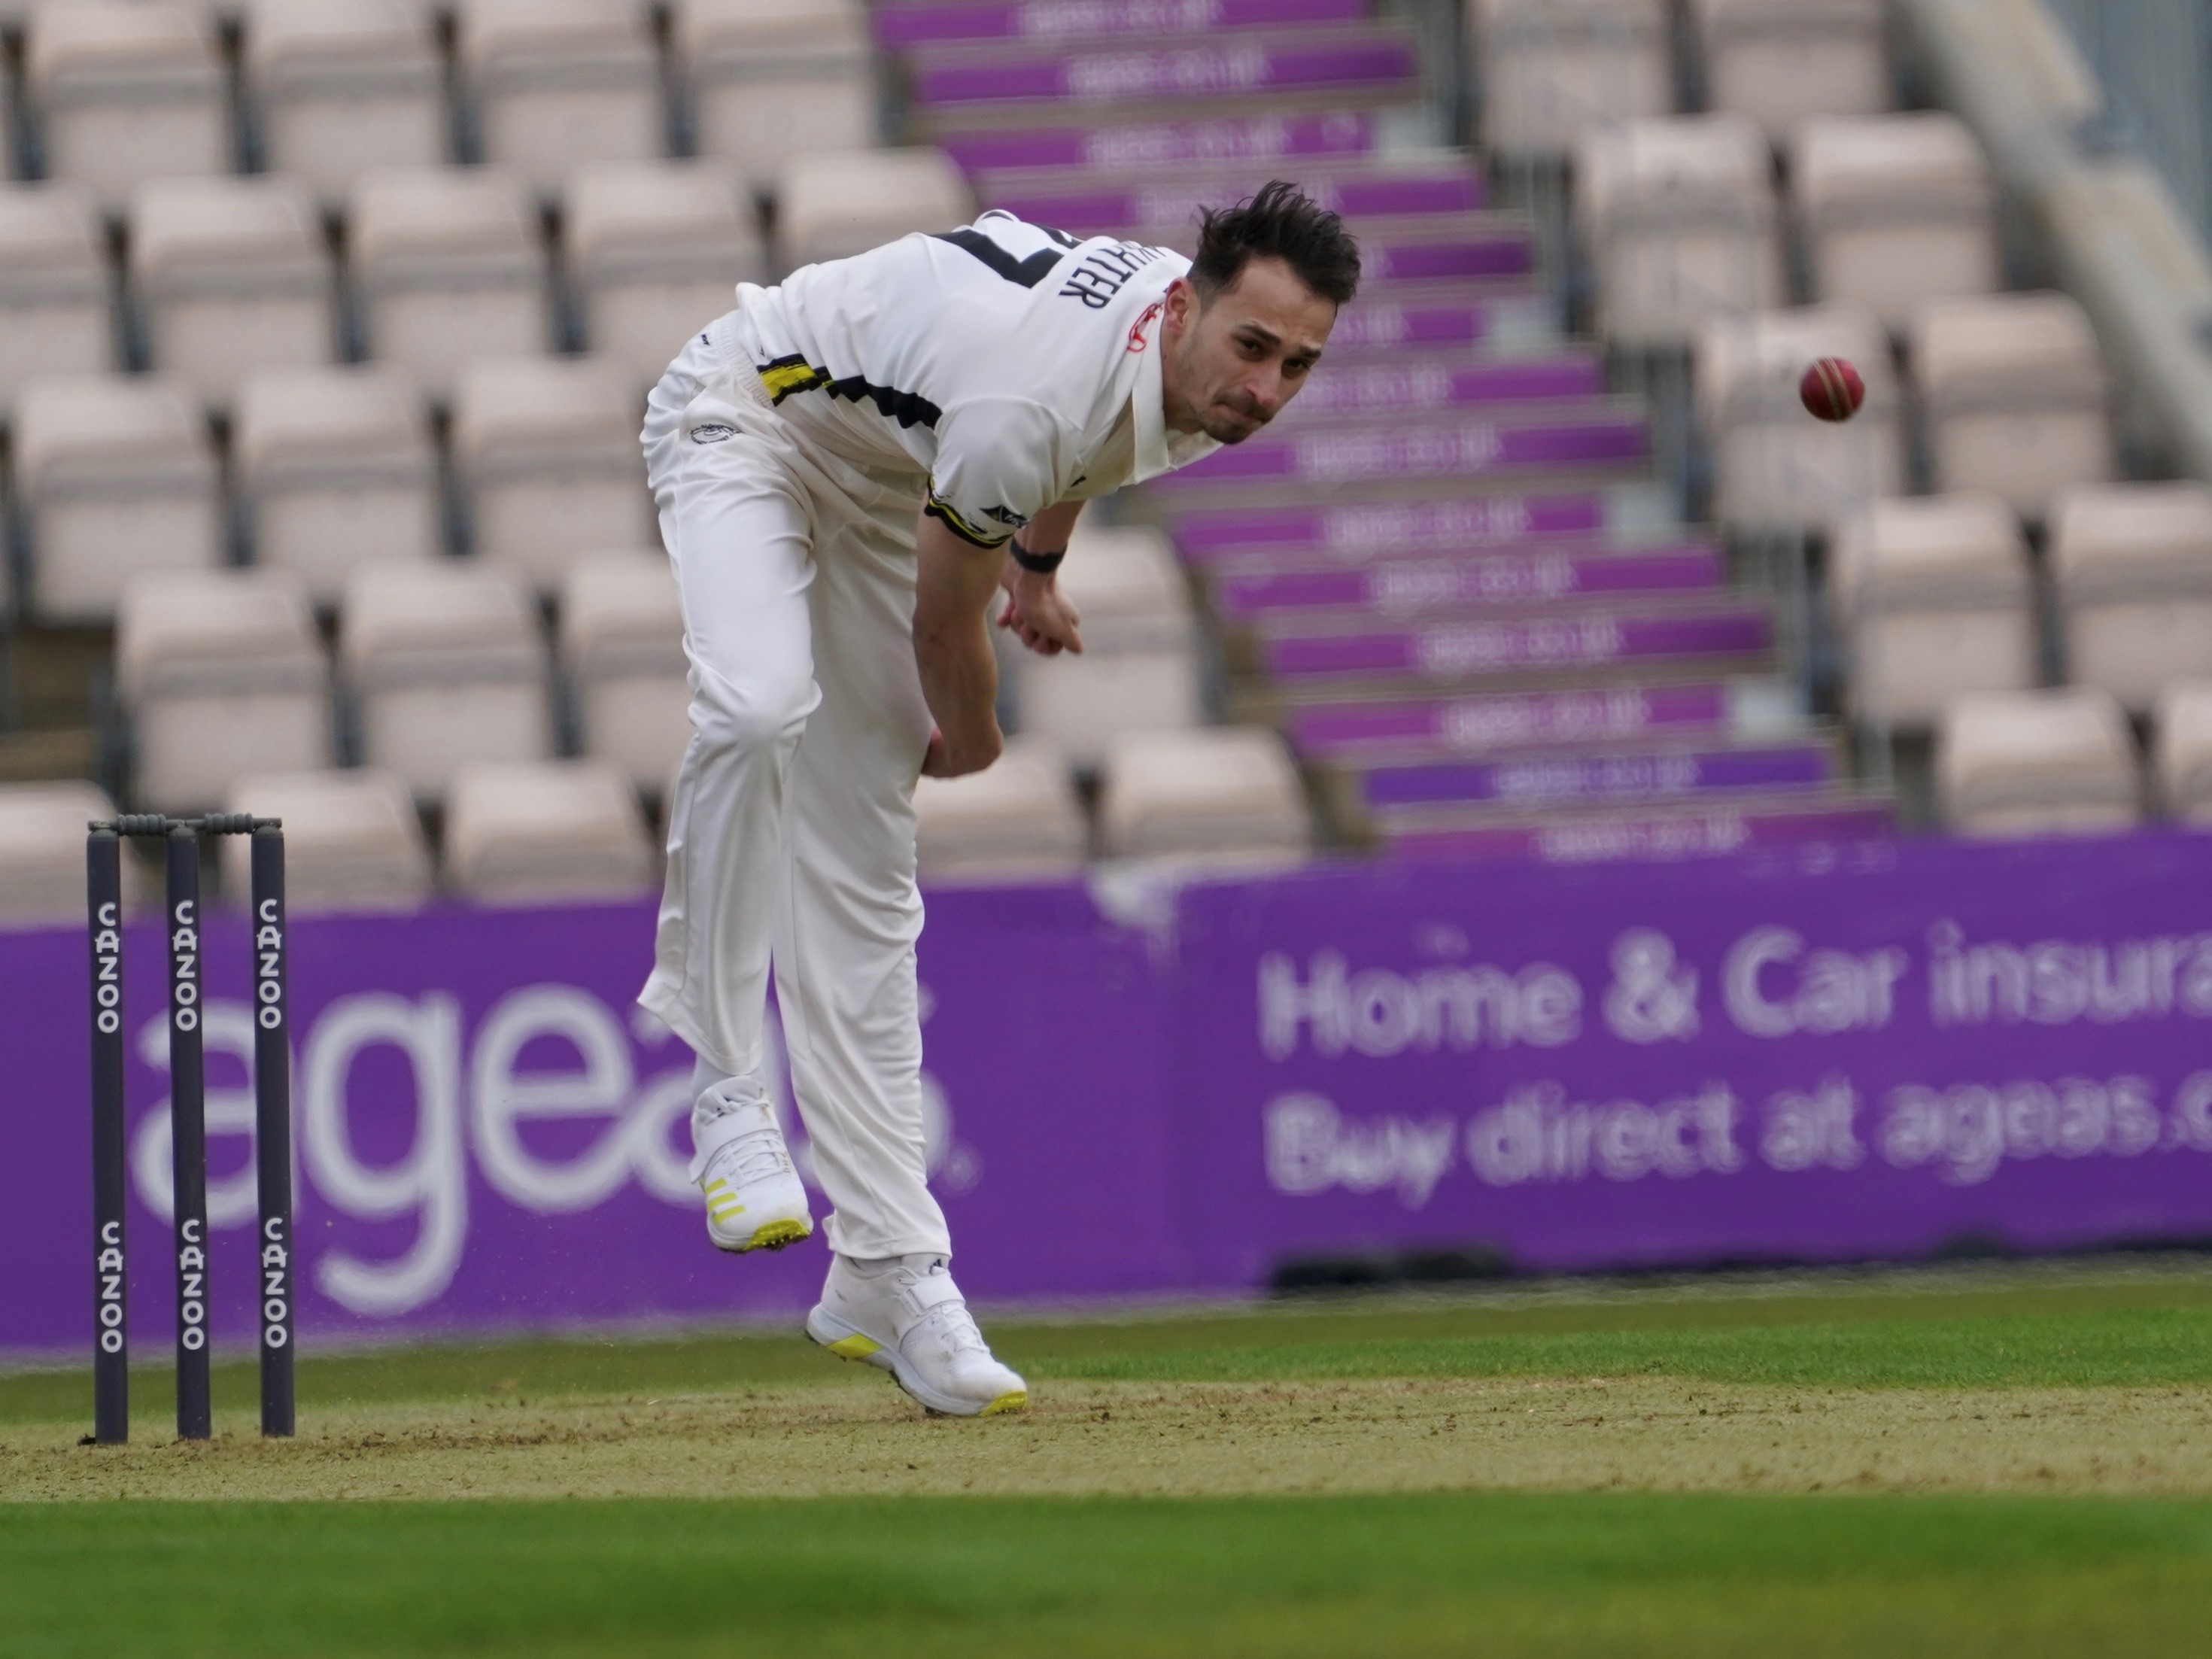 New Gloucestershire signing Zaman Akhter bowls at the Ageas Bowl versus Hampshire